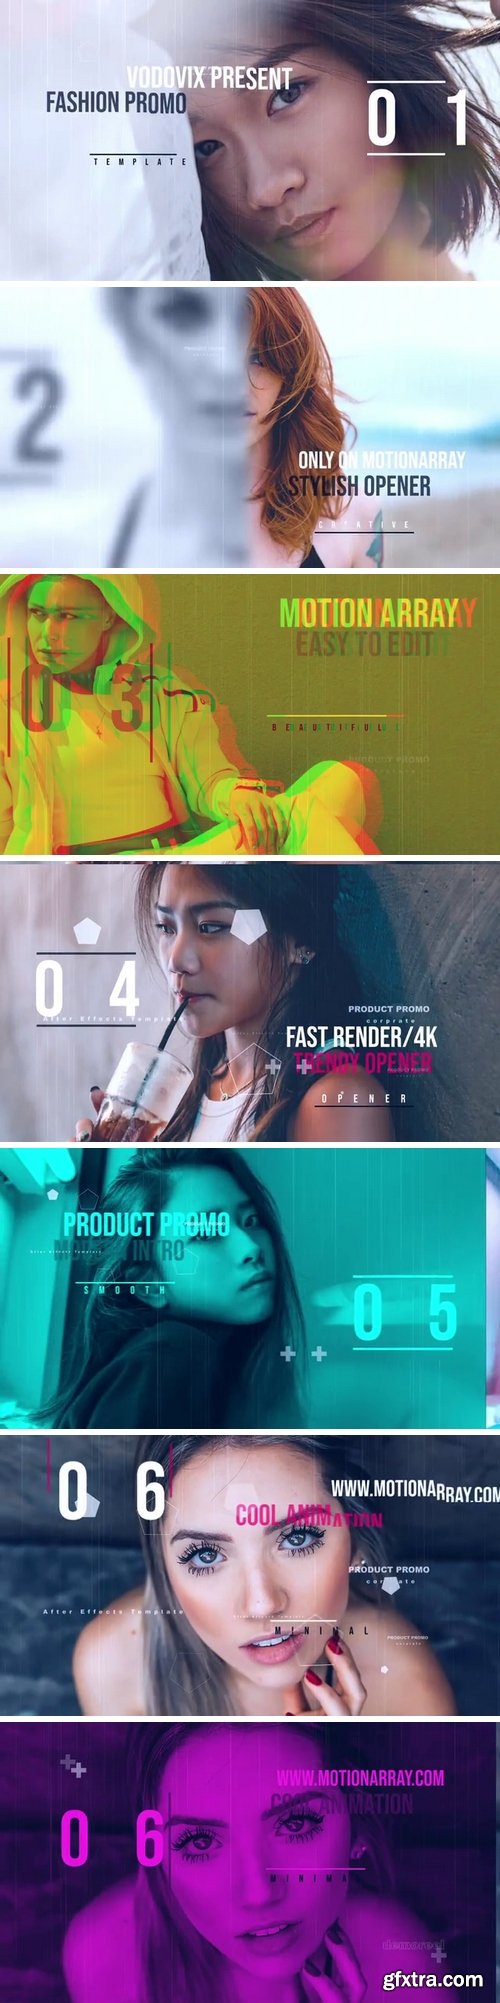 MA - The Fashion Promo After Effects Templates 152054